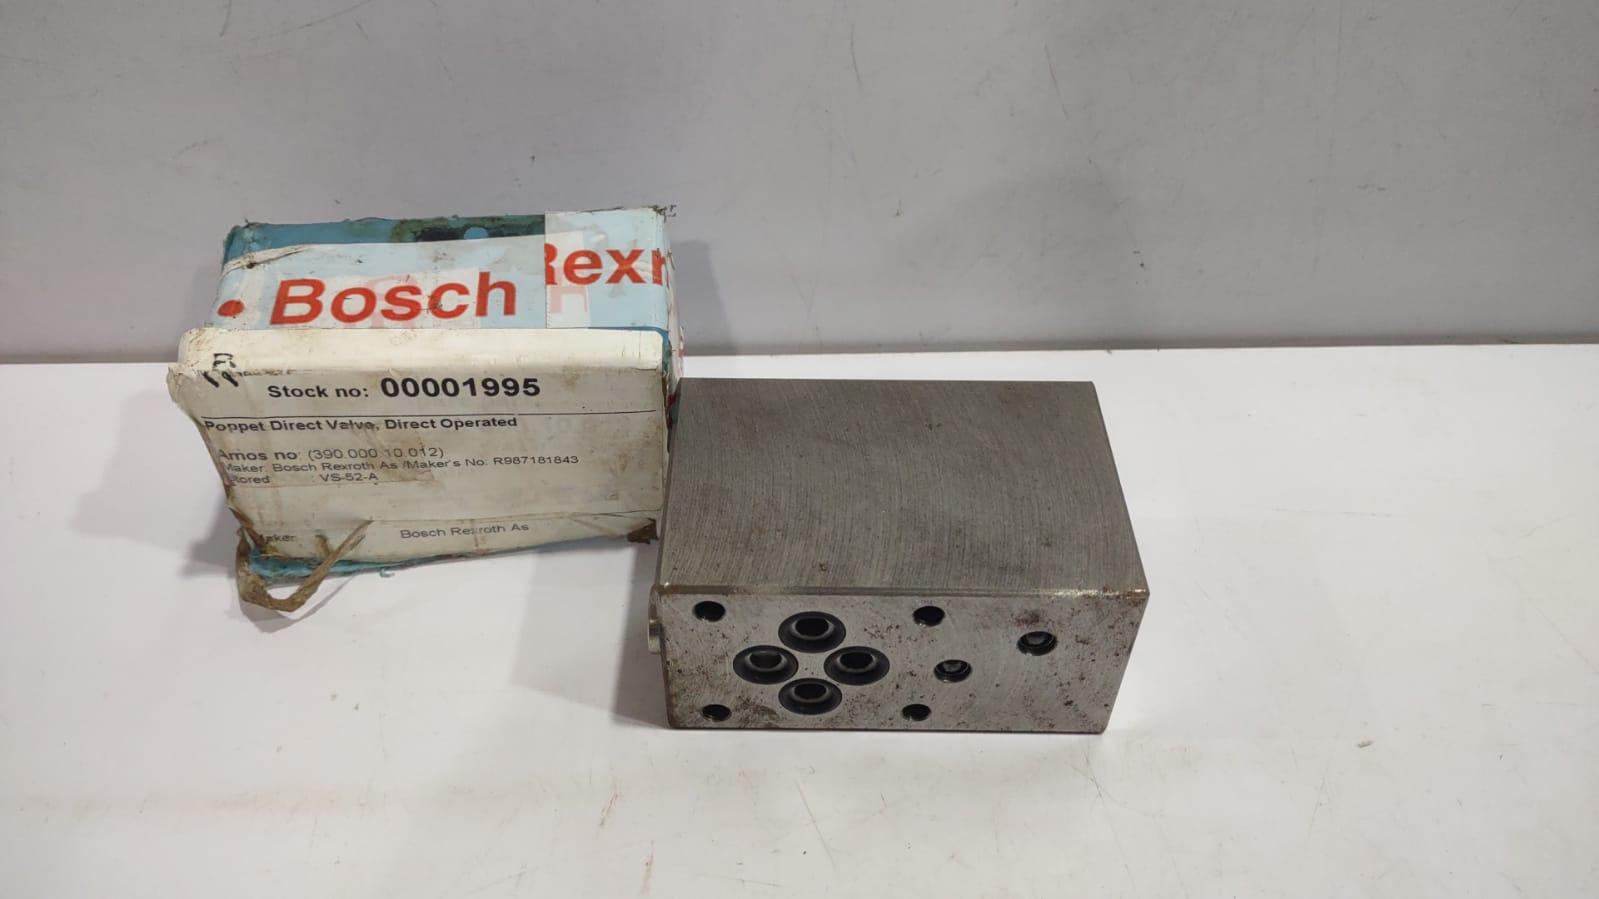 Rexroth R987181843 Poppet Direct Valve Direct Operated